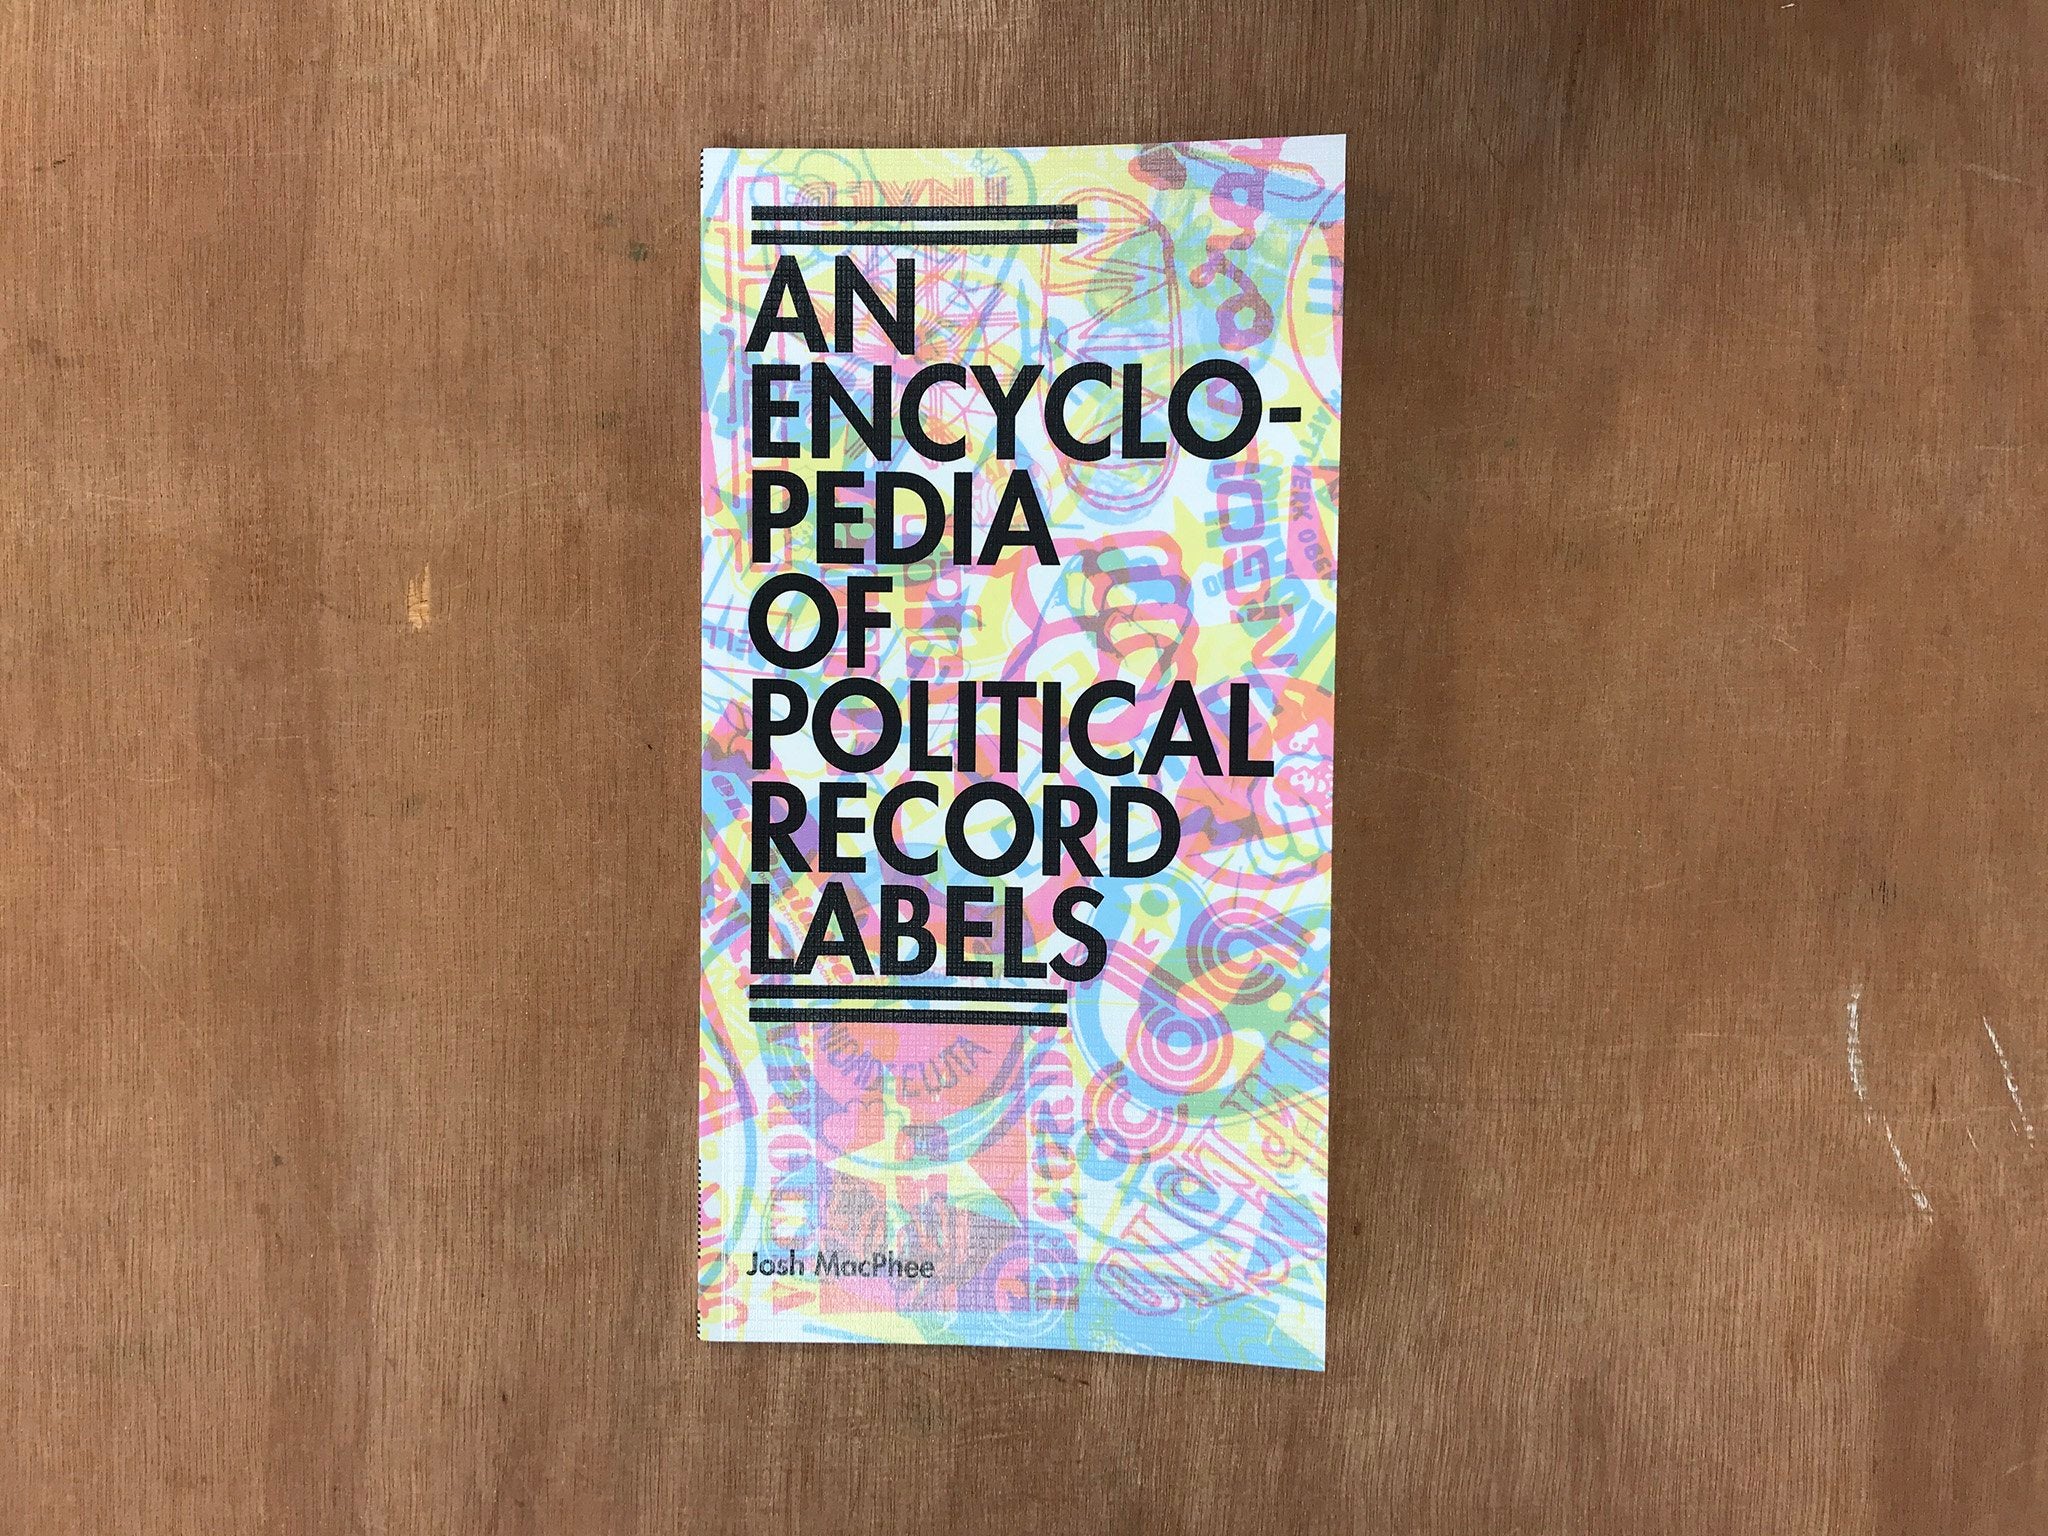 AN ENCYCLOPEDIA OF POLITICAL RECORD LABELS by Josh MacPhee